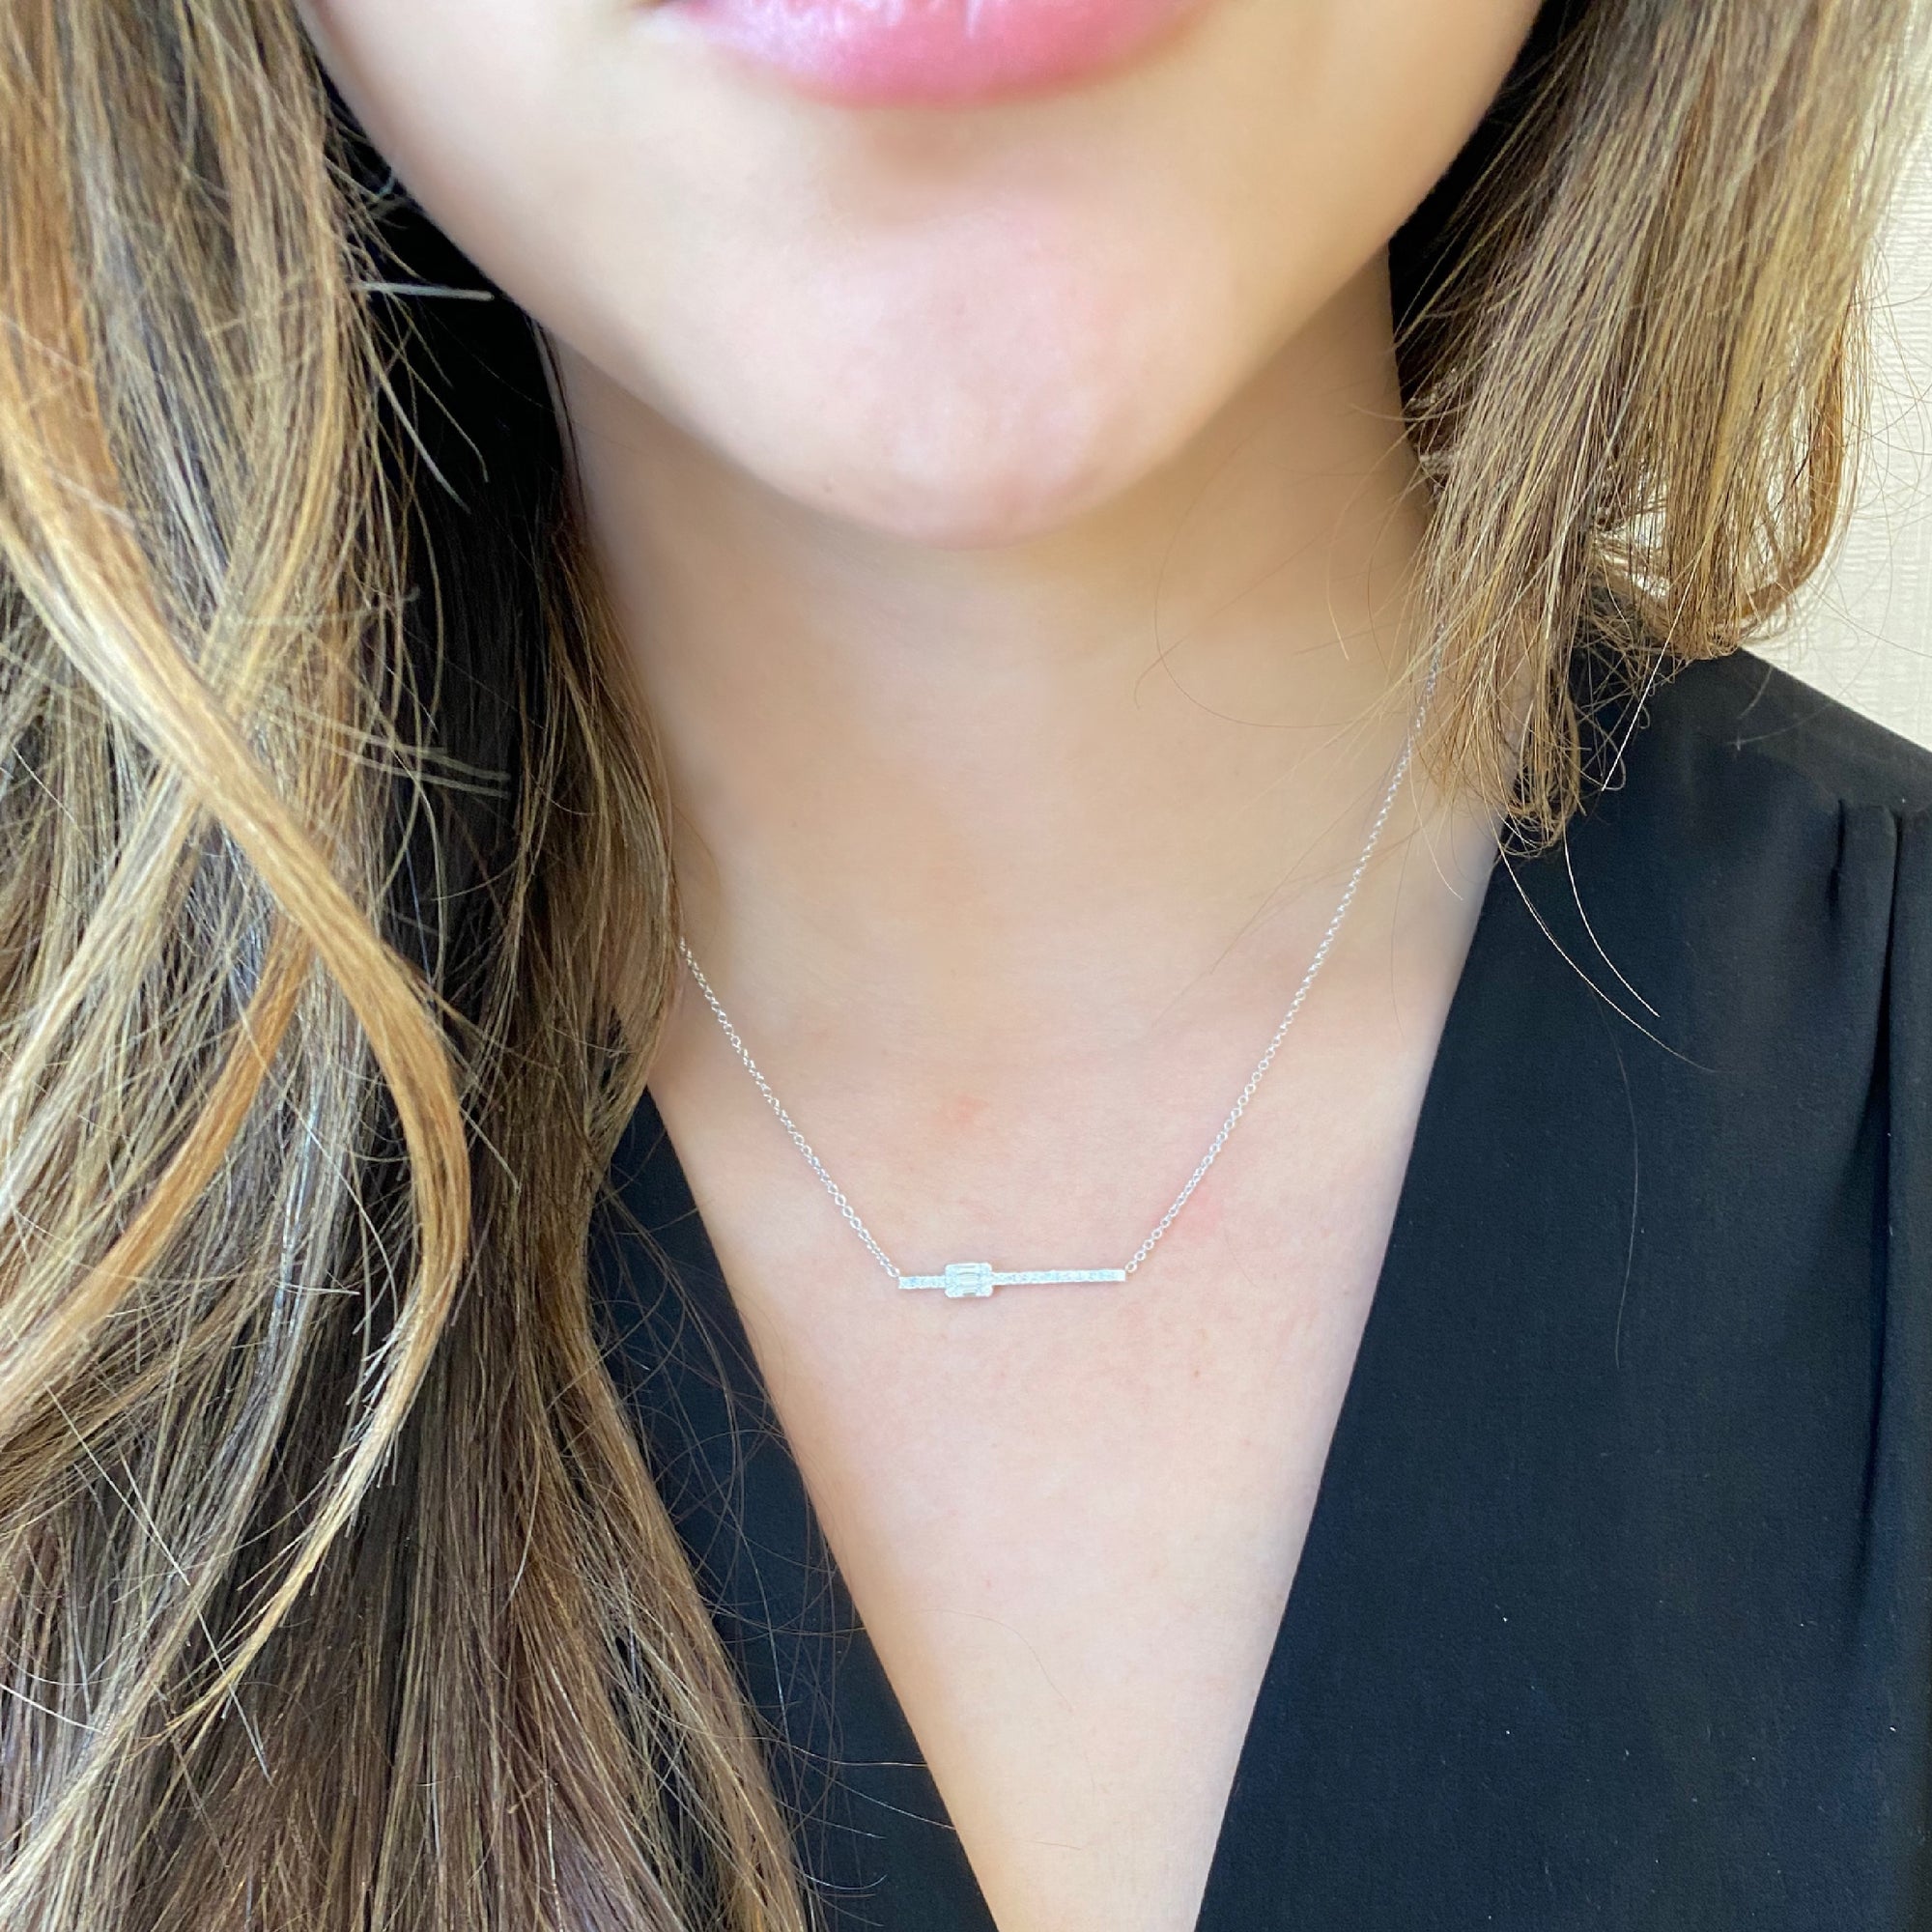 Diamond Bar Pendant with Diamond Rectangle Accent - 18K white gold weighing 3.08 grams - 22 round diamonds totaling 0.19 carats - 3 straight baguettes totaling 0.13 carats